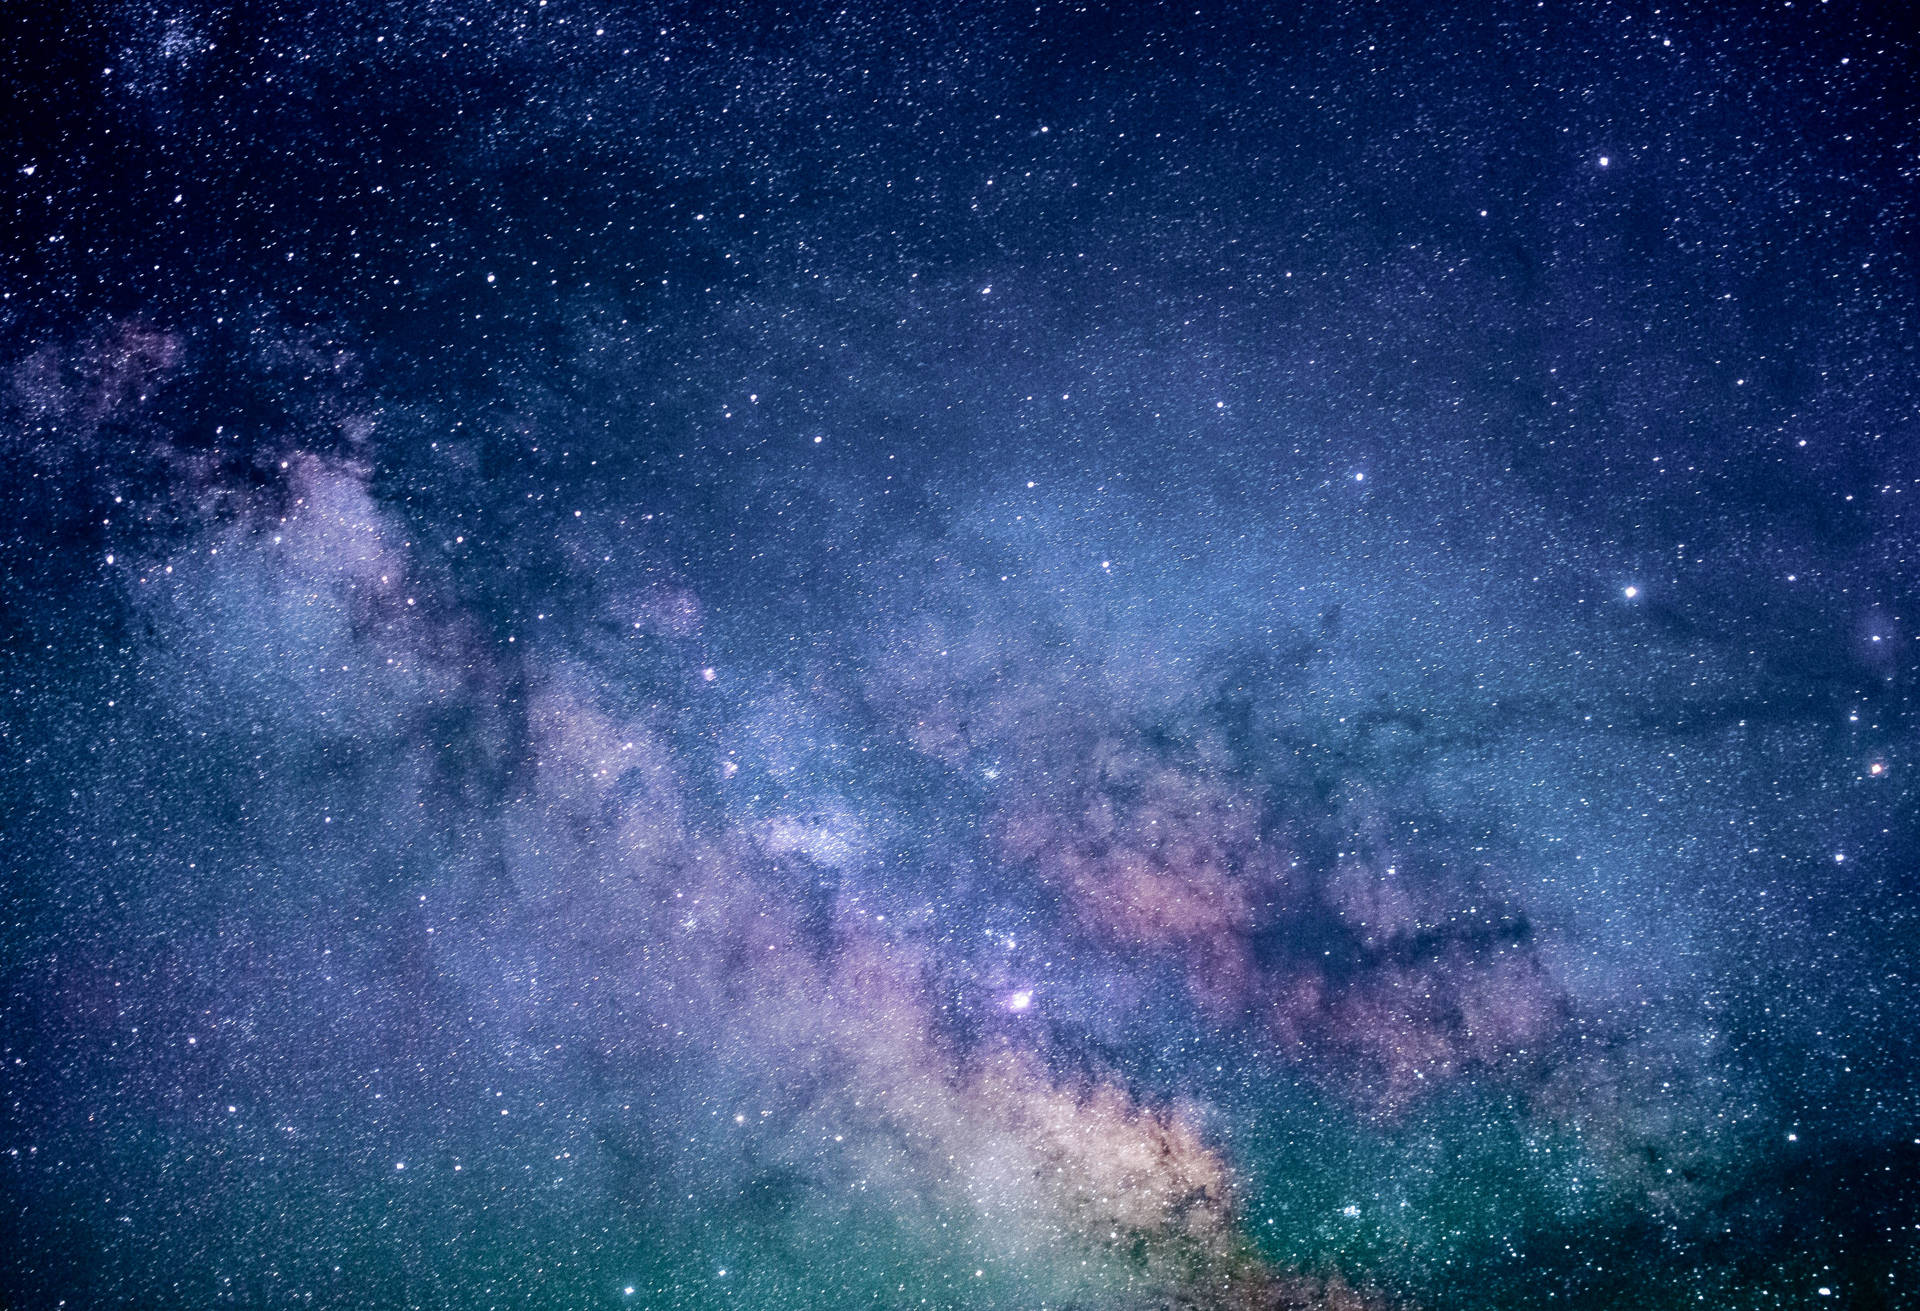 Cute Galaxy 5005X3417 Wallpaper and Background Image